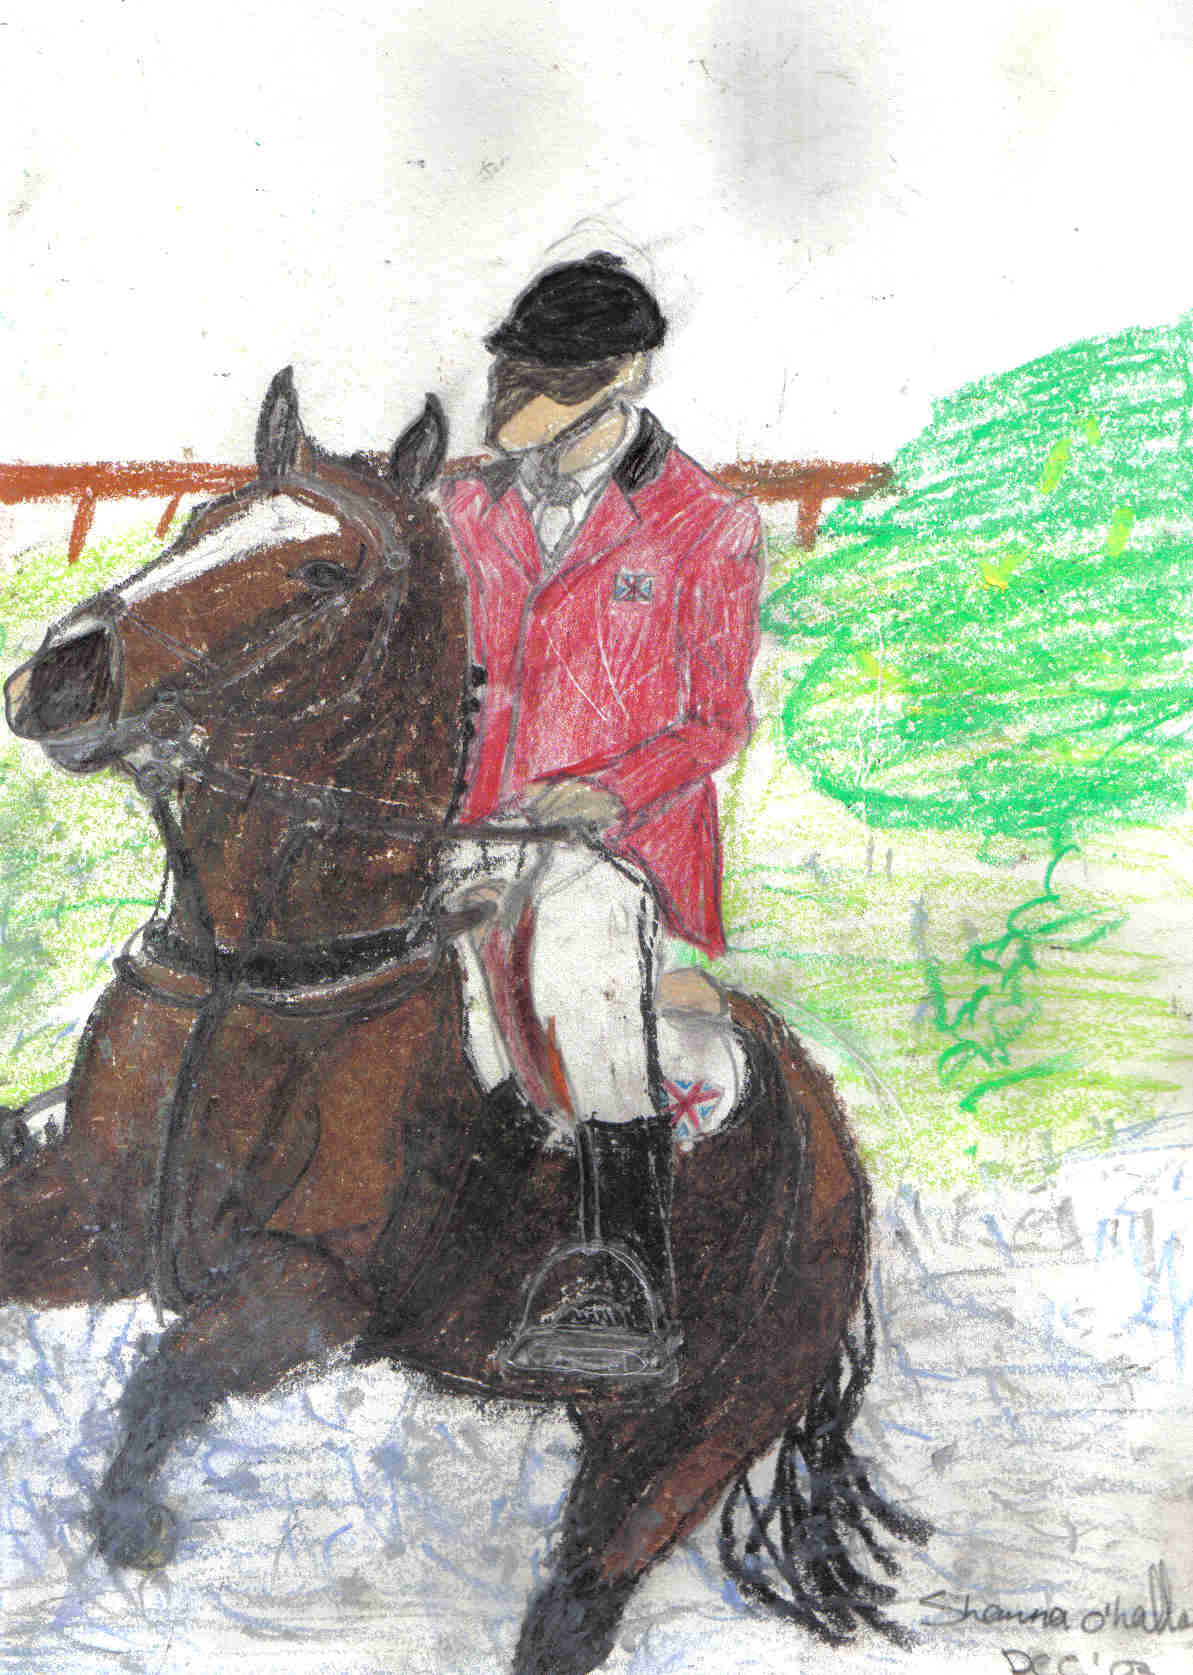 Horse (Drawn in oil pastels) by Shawna